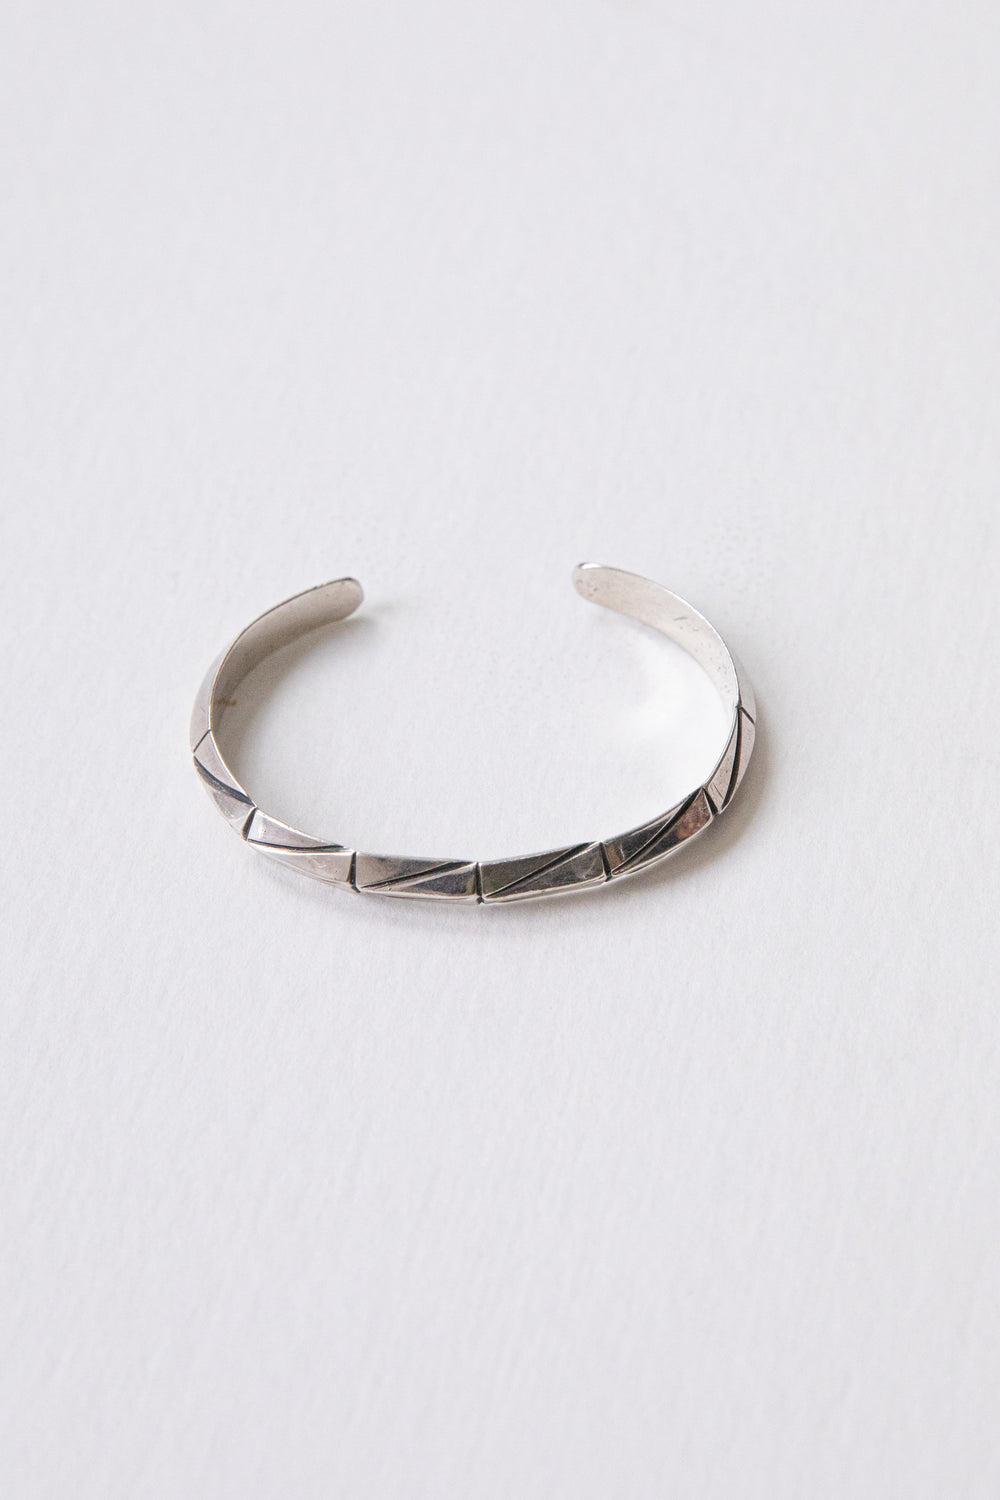 Diagonal Stamped Sterling Cuff